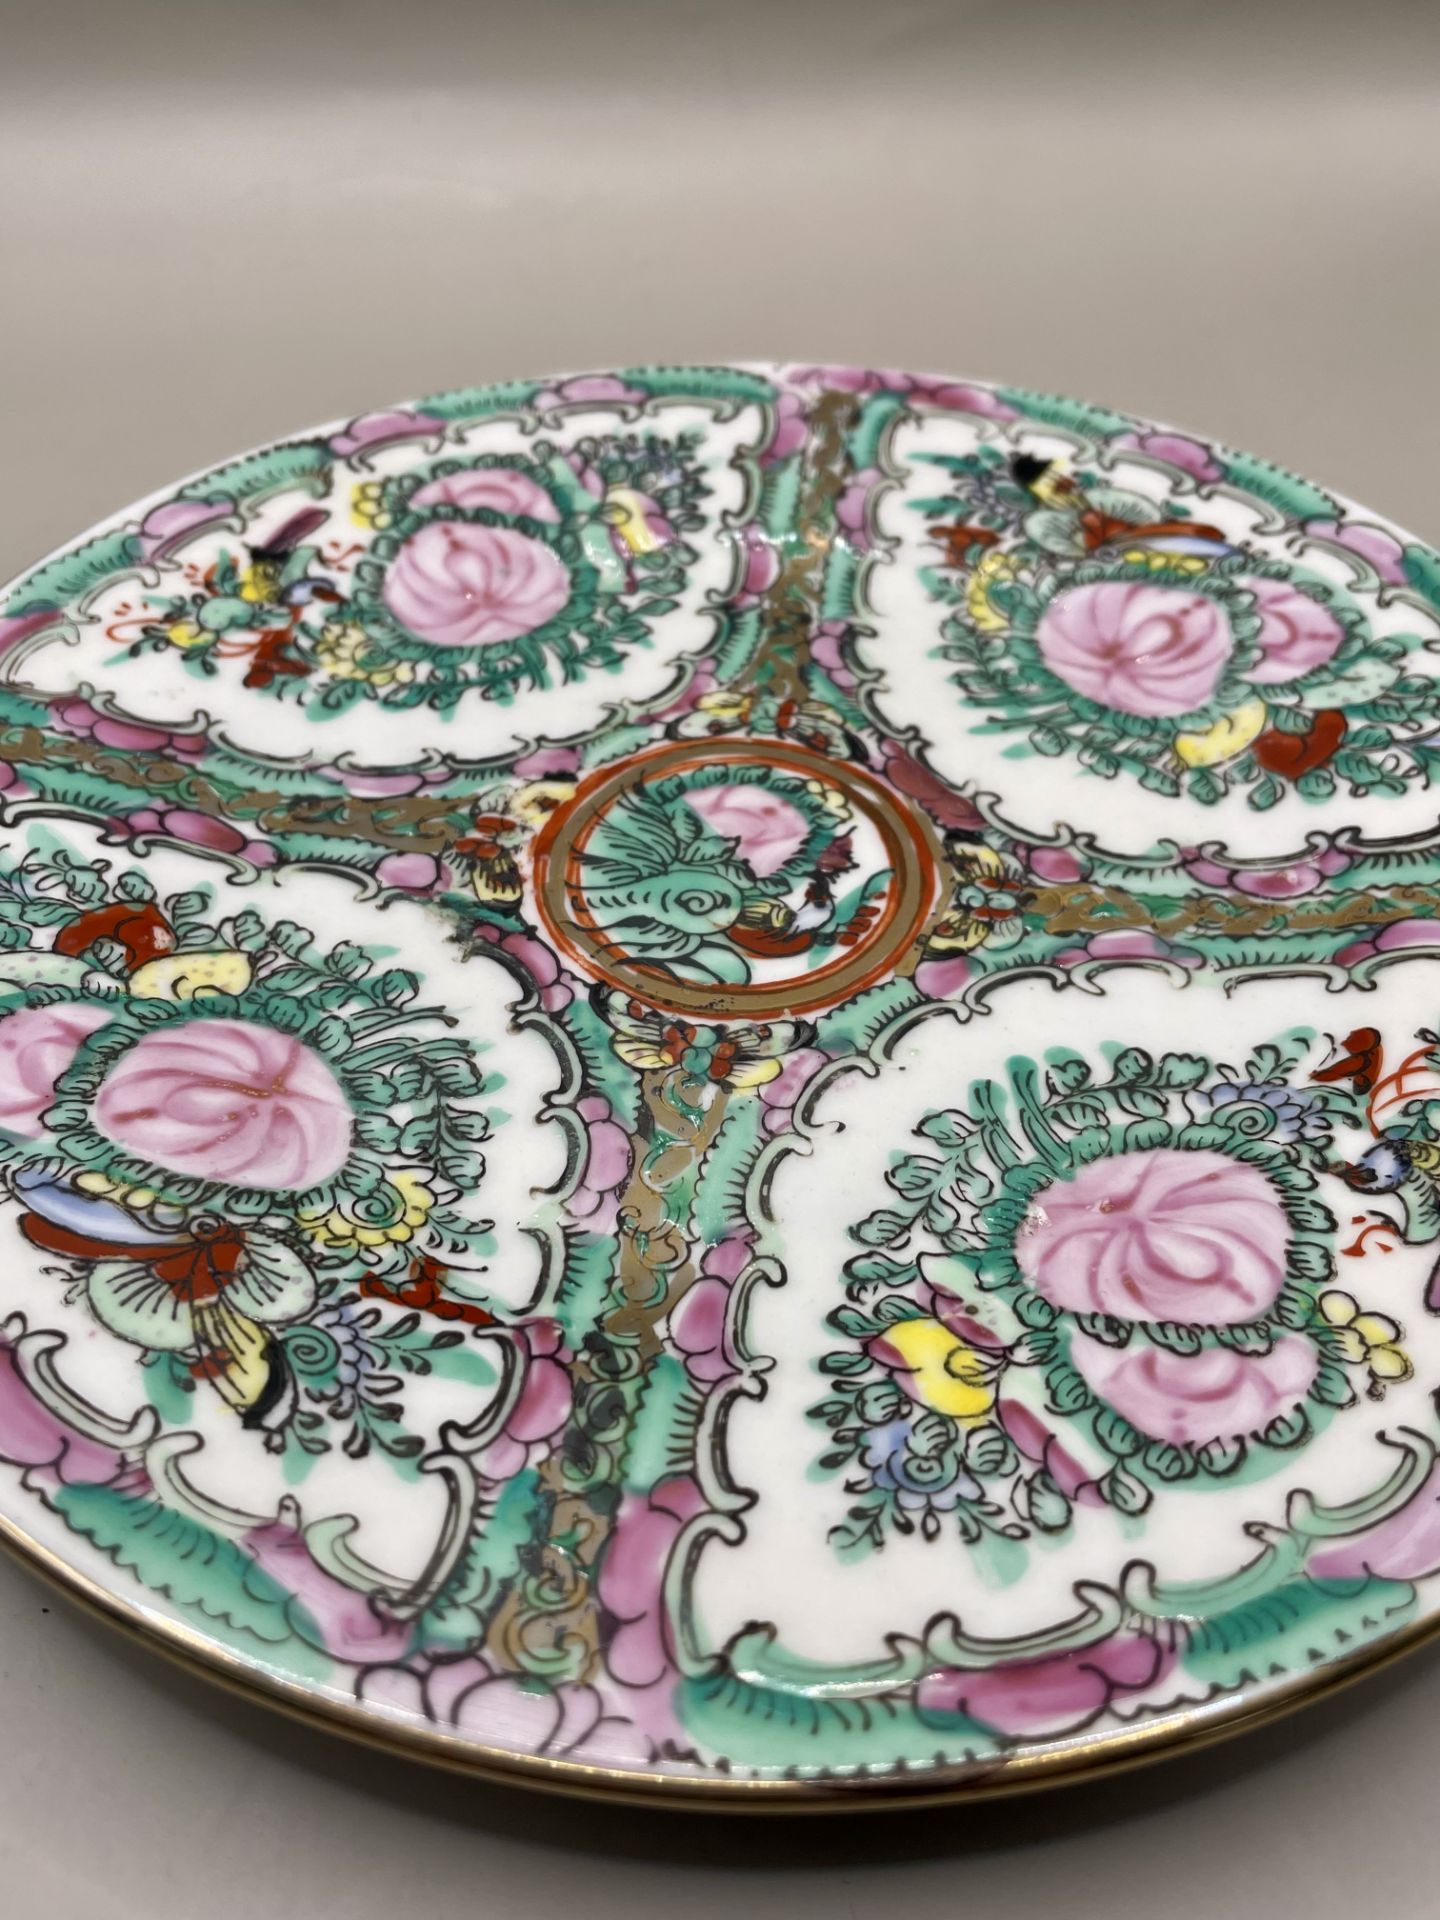 Antique Chinese Famille Rose Porcelain Plate, Circa 1880-1890. - Image 2 of 7